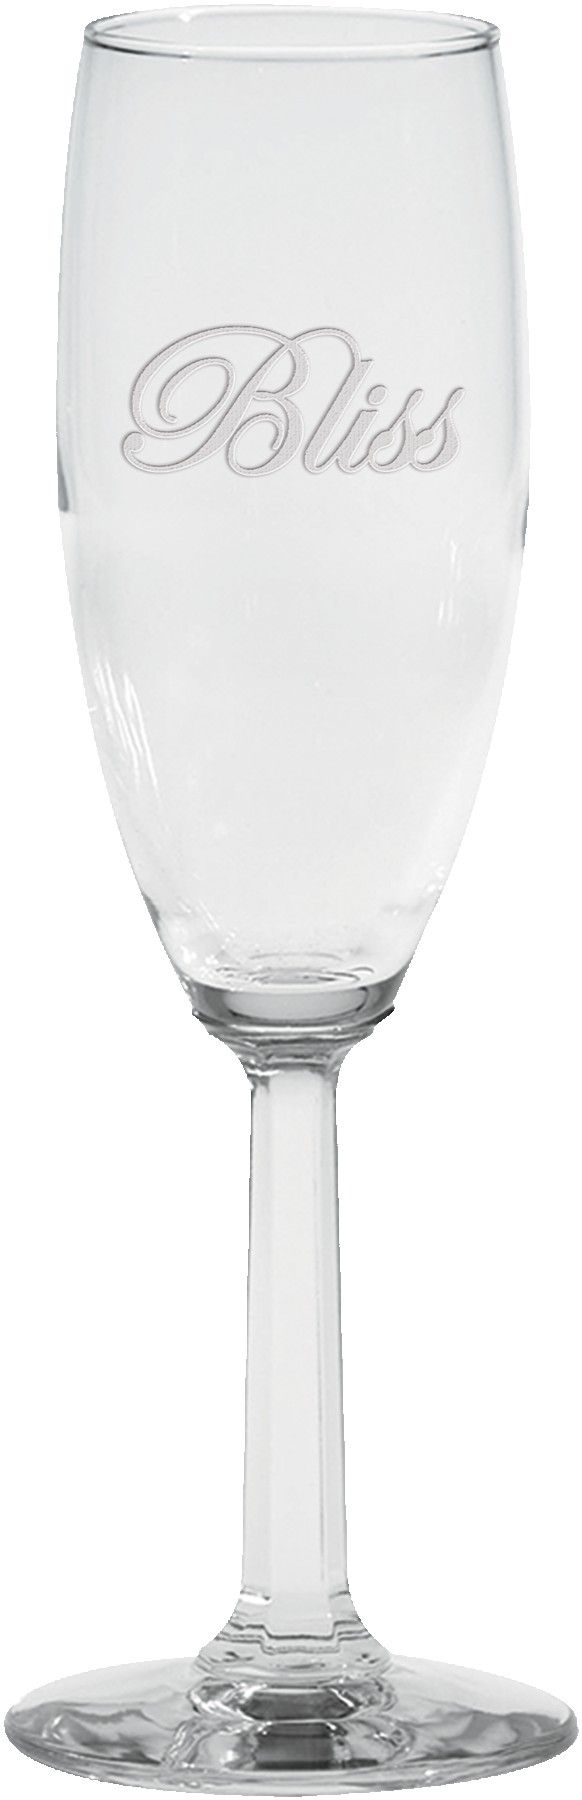 The Napa Valley Flute 6 oz Optic Stem Wine Glass - Etched